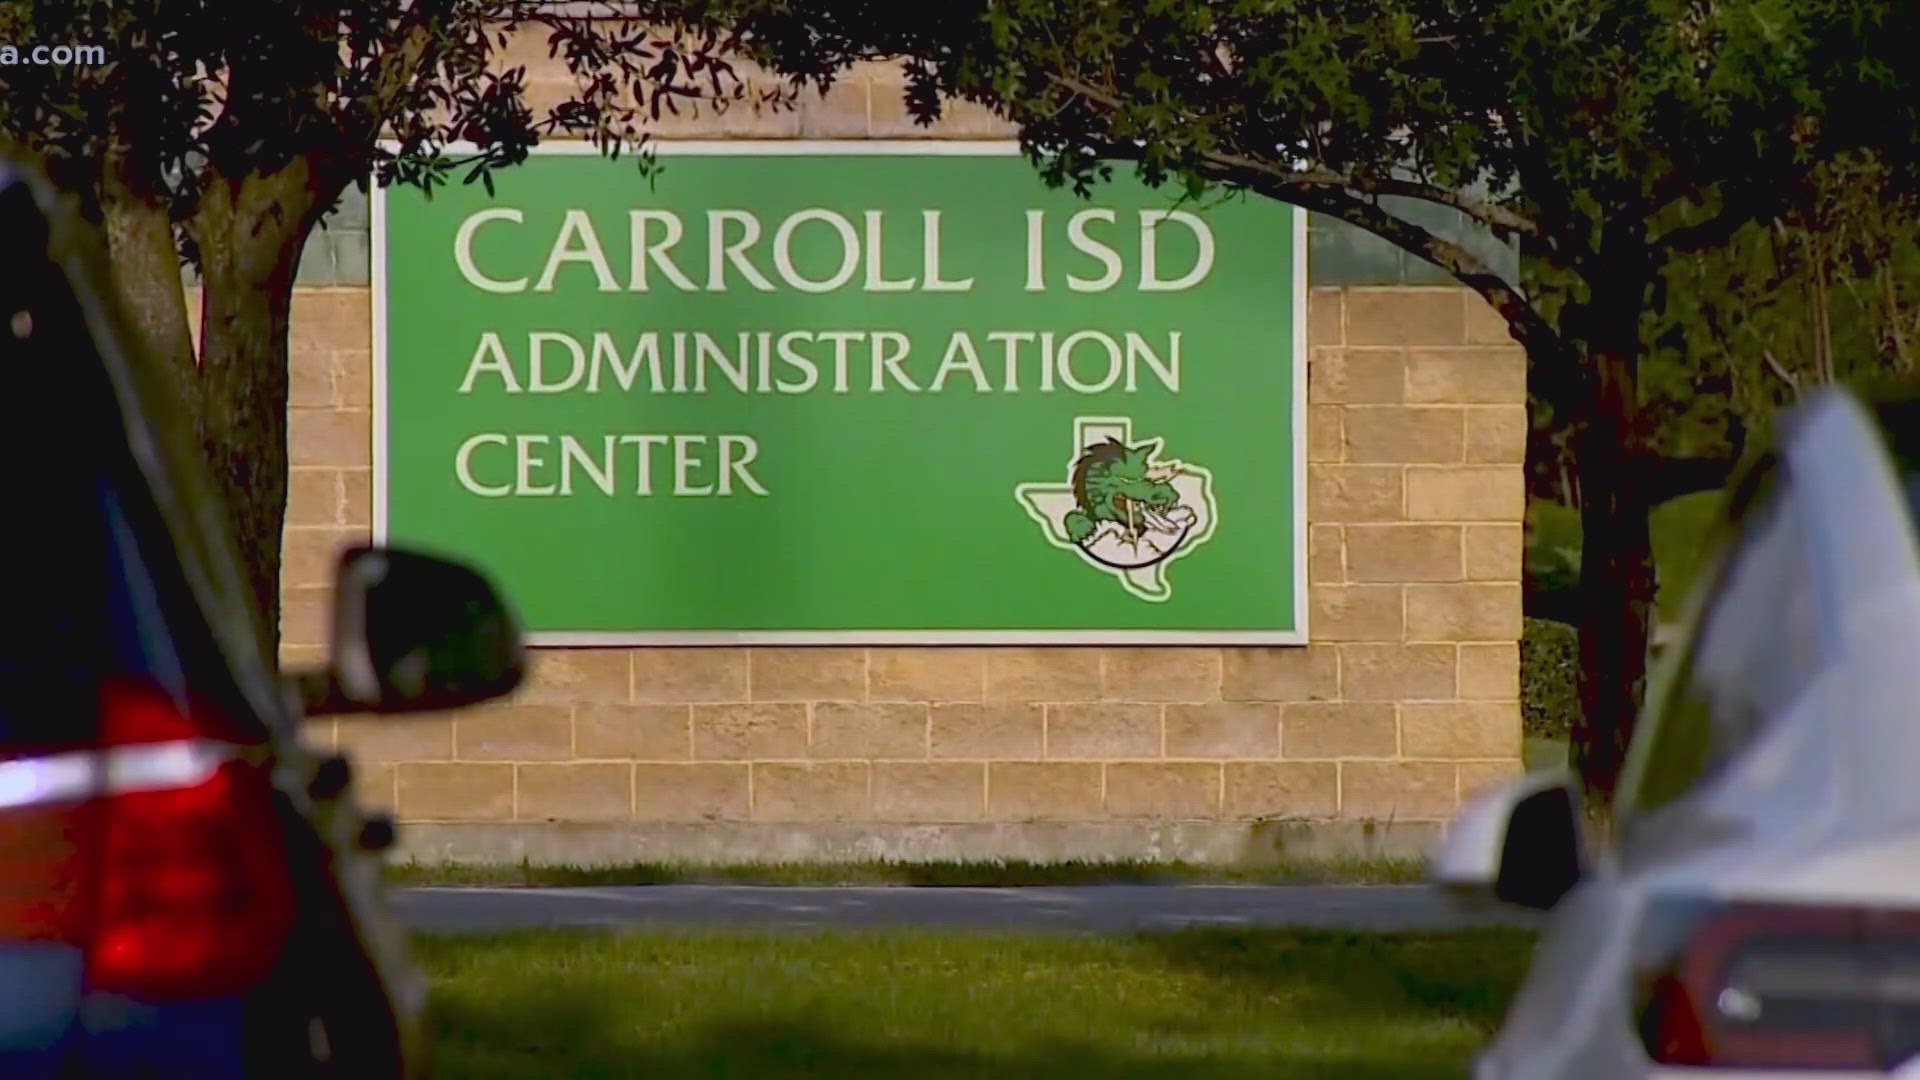 Chris Sadeghi has an update on the ongoing civil rights investigation at the Carroll ISD.